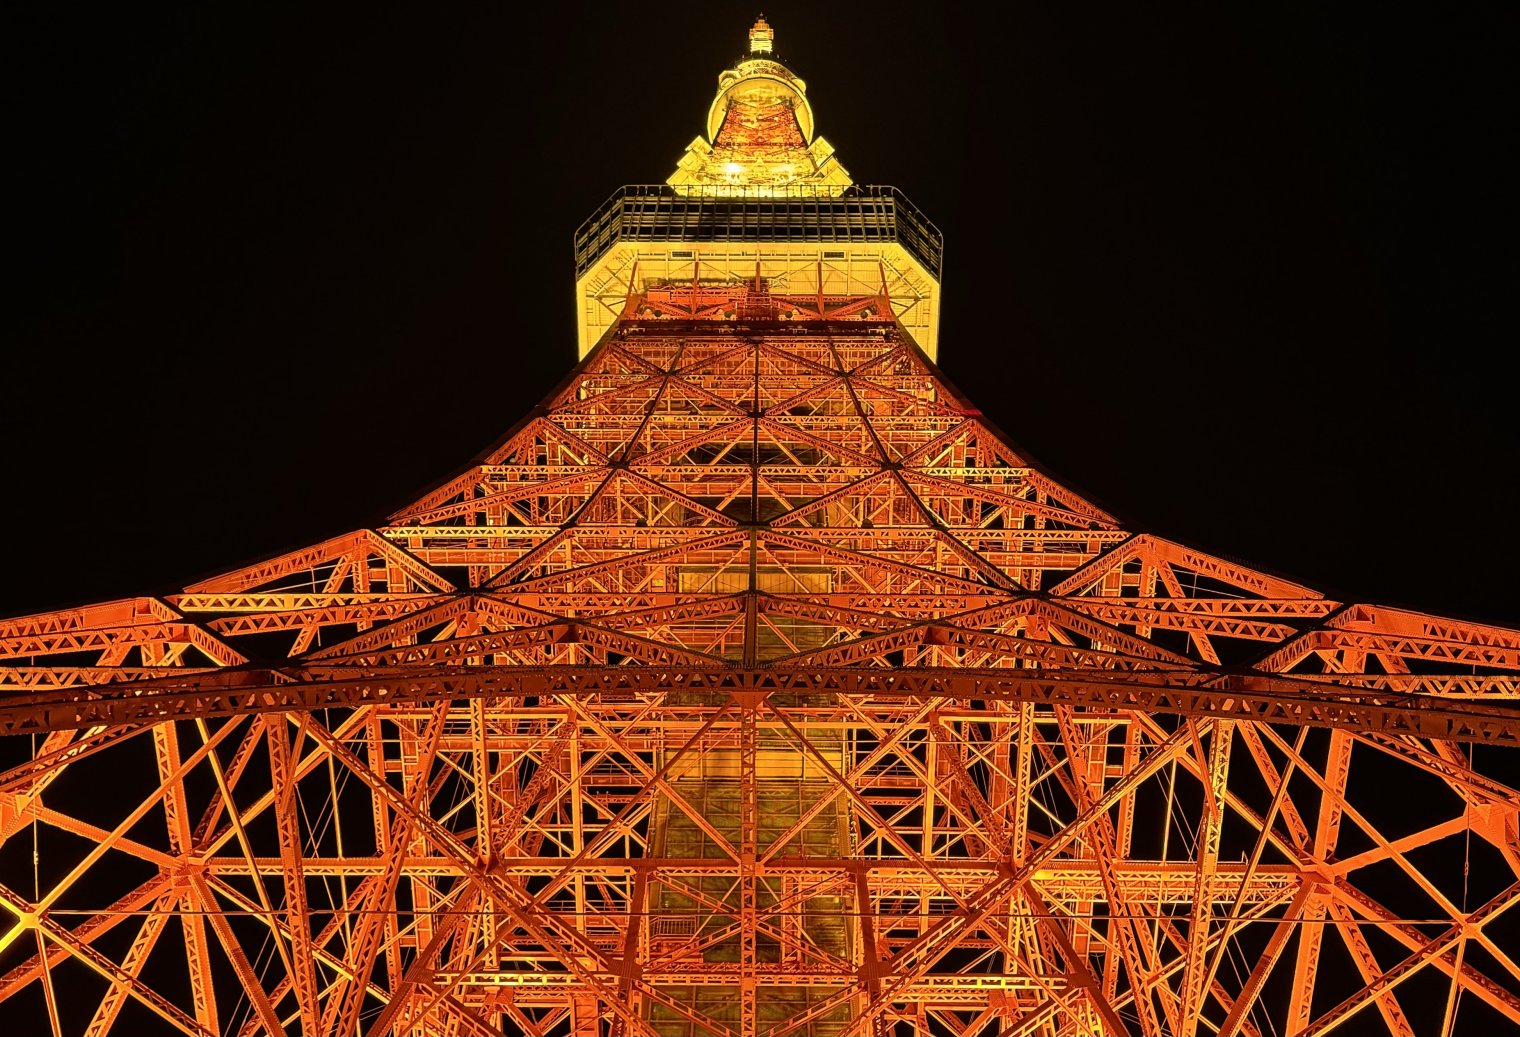 View of Tokyo Tower from its base